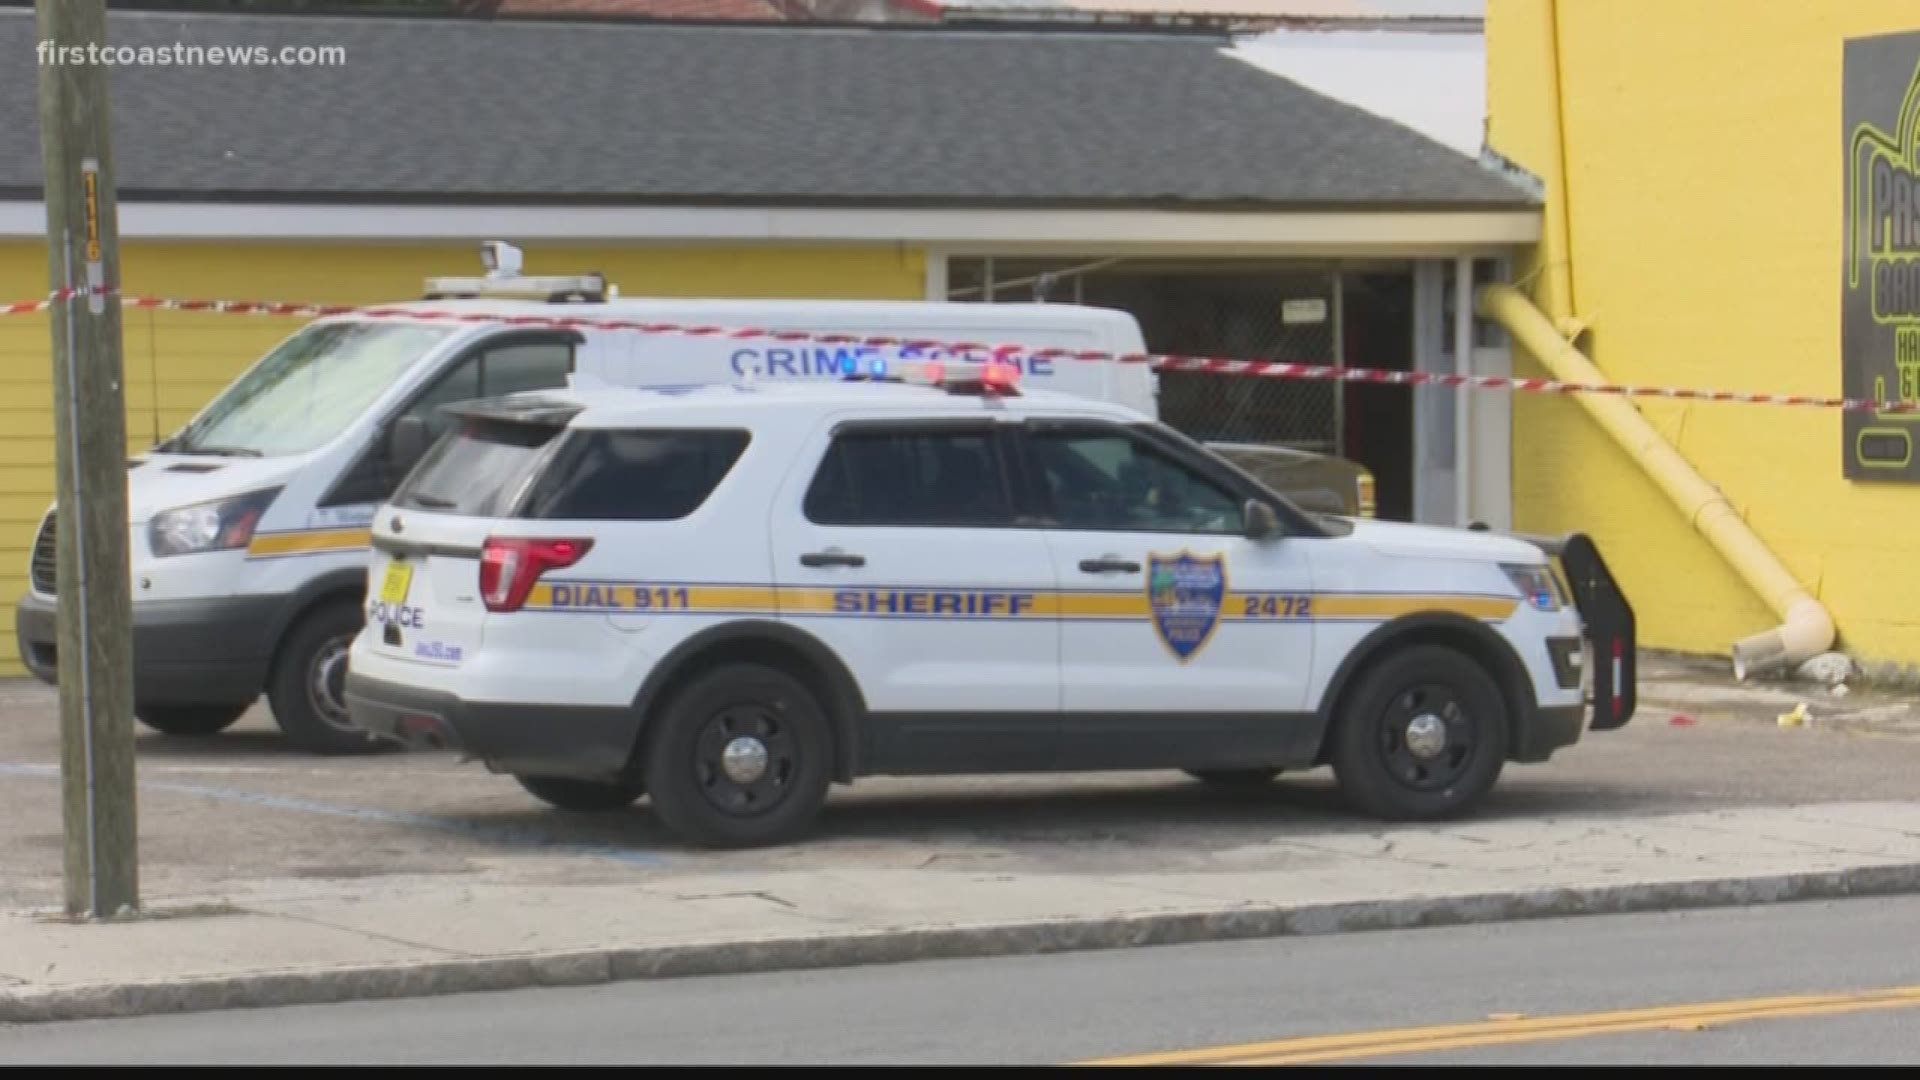 A deputy from the Jacksonville Sheriff's Office told First Coast News the suspect entered the store, robbed the cash register then tried to rob the clerk. The clerk pulled out a gun and the suspect fled out the door.